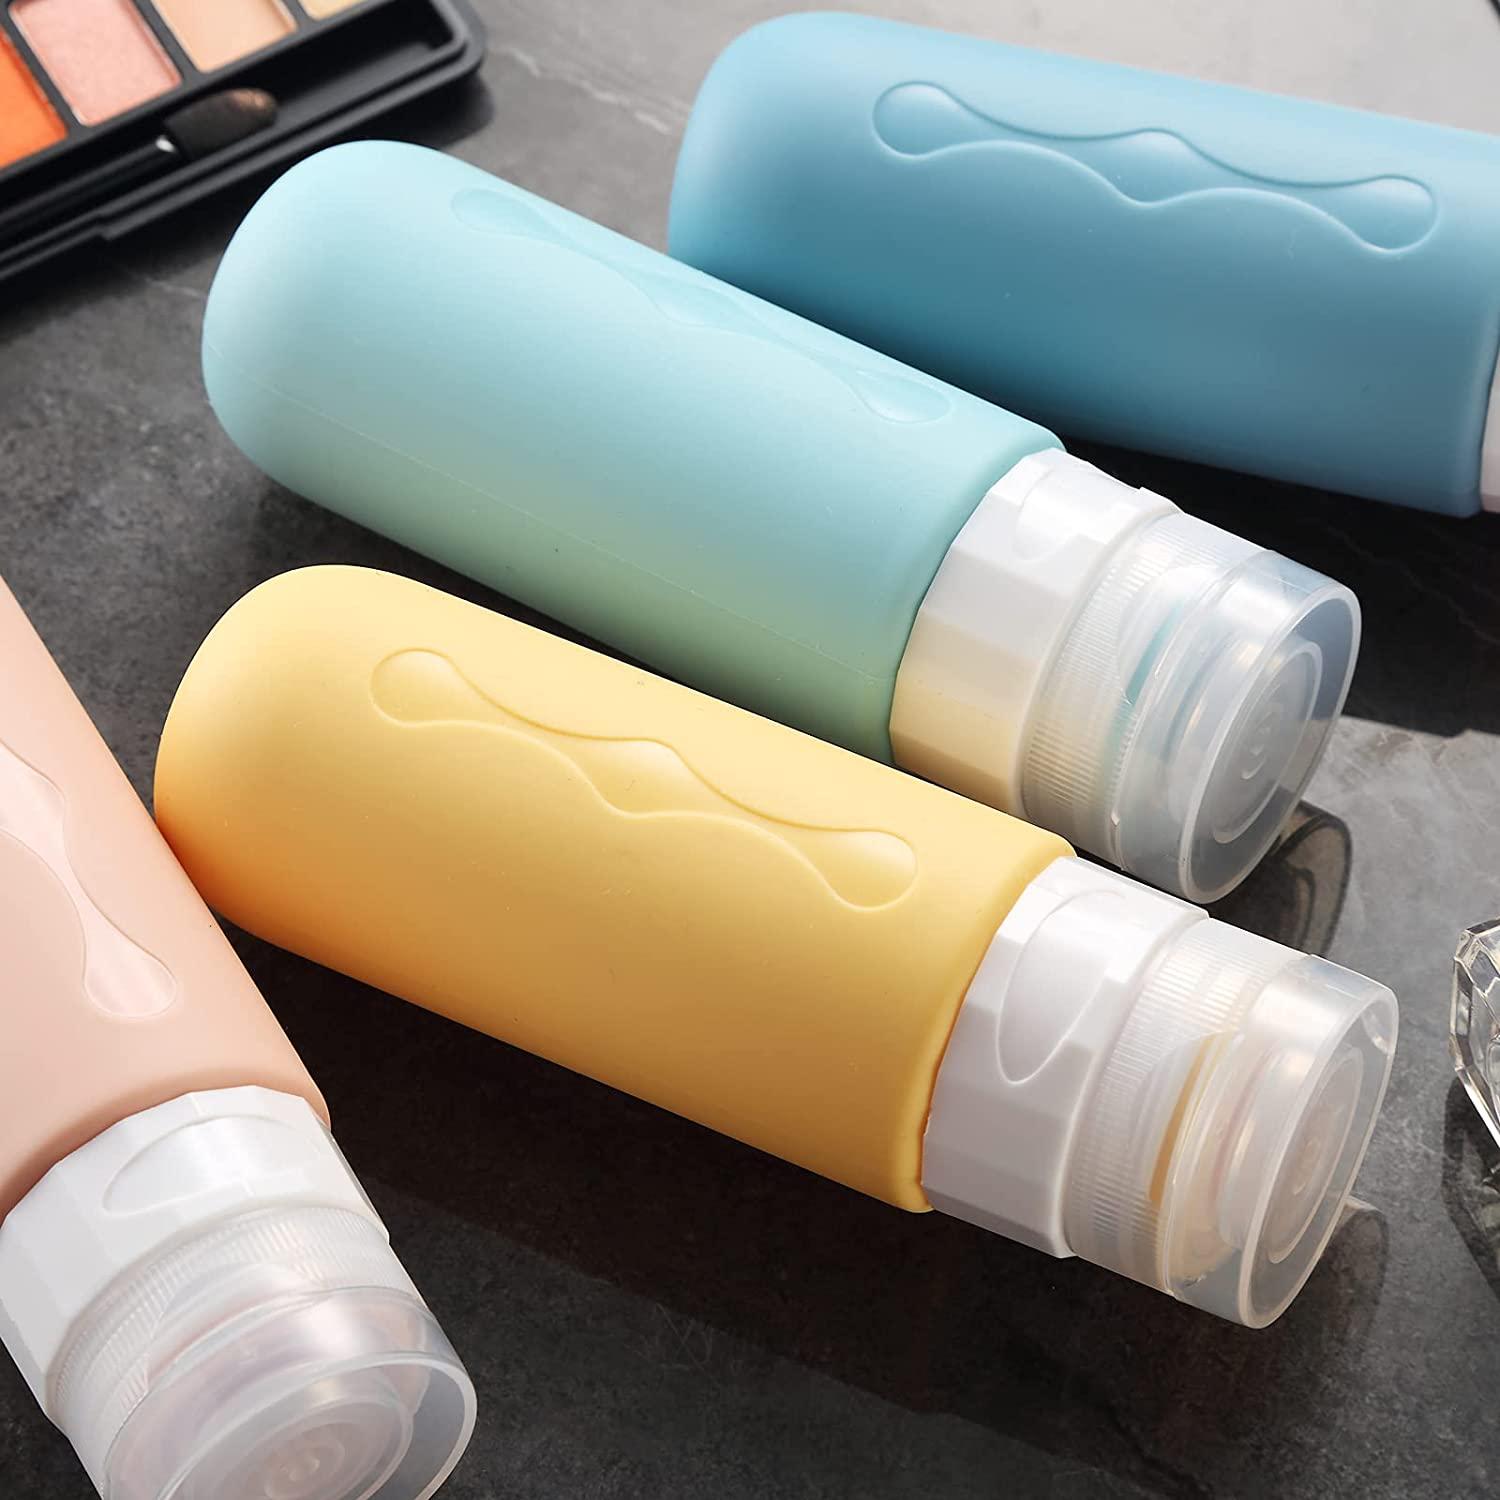 Shoppers Love the Gemice Silicone Travel-size Bottles